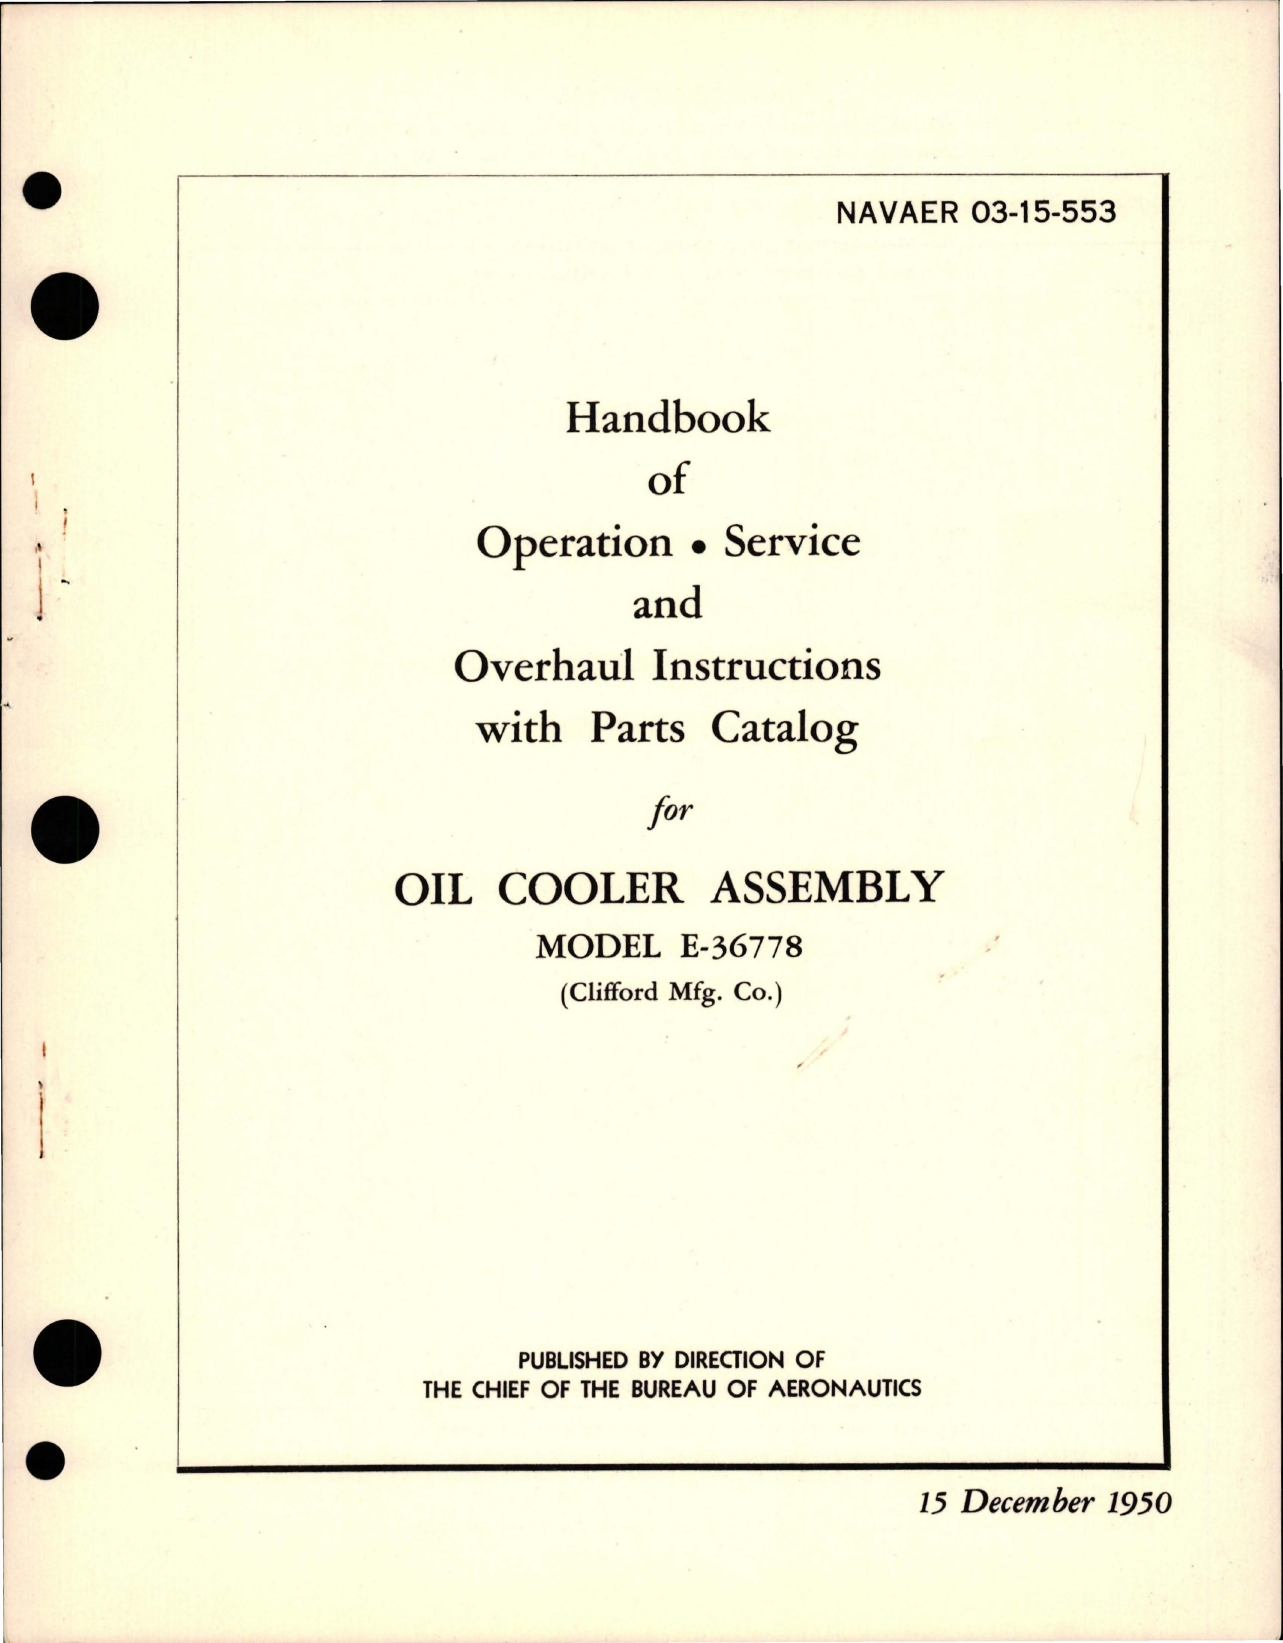 Sample page 1 from AirCorps Library document: Operation, Service and Overhaul Instructions with Parts for Oil Cooler Assembly - Model E-36778